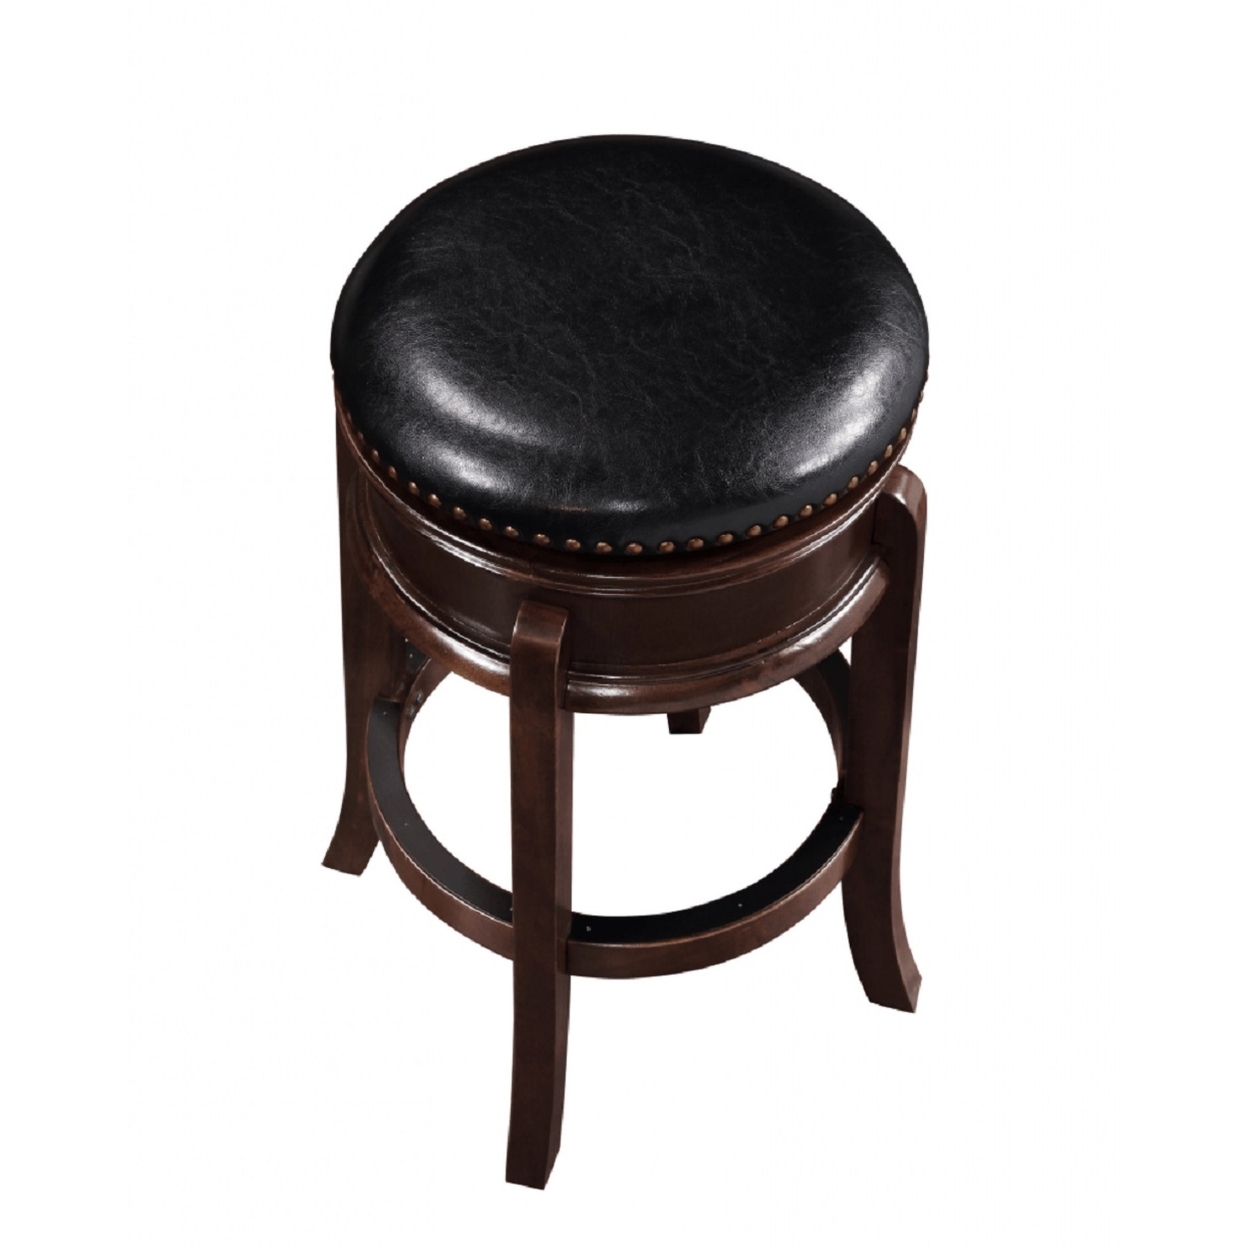 Sabi 29 Inch Swivel Counter Stool, Solid Wood, Faux Leather, Espresso Brown, Black